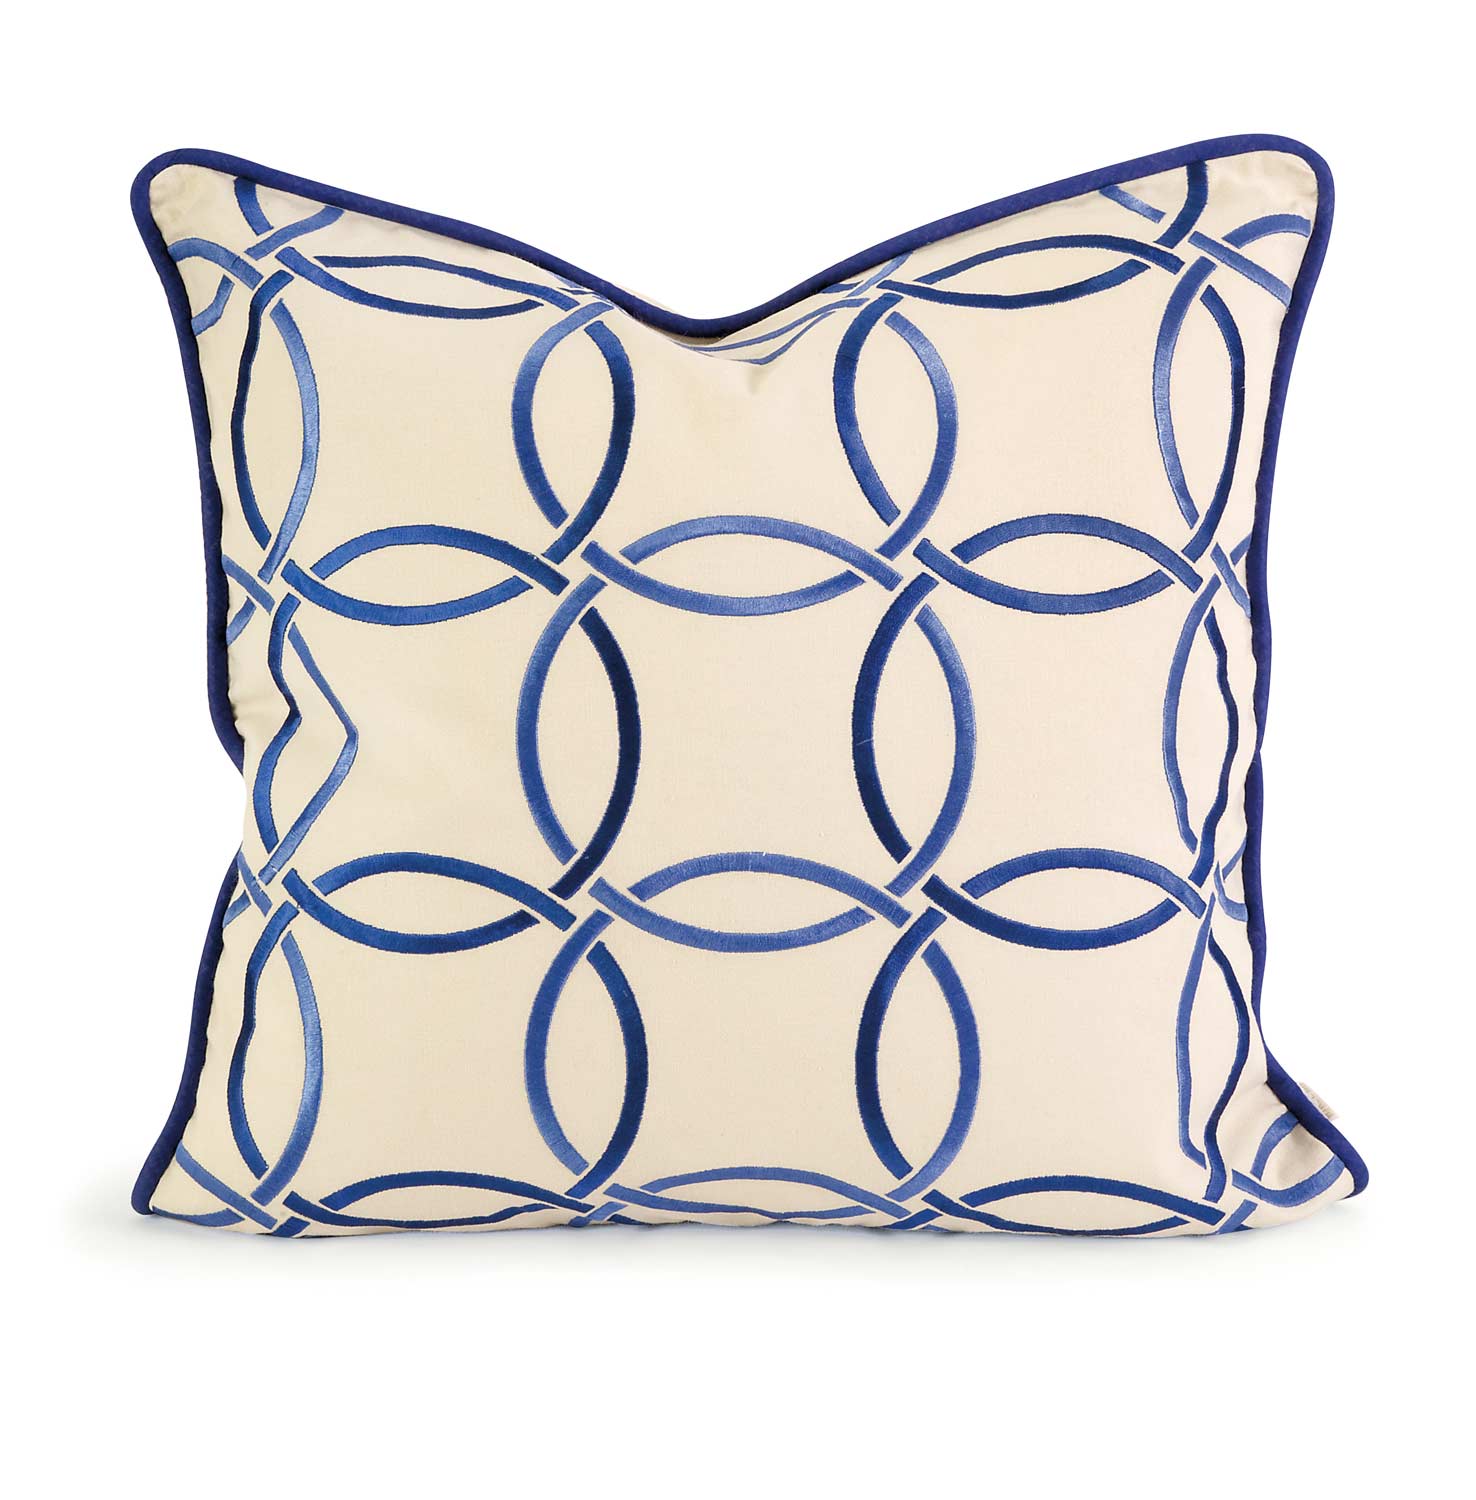 IMAX Ik Catina Blue Embroidered Linen Pillow with Down Fill